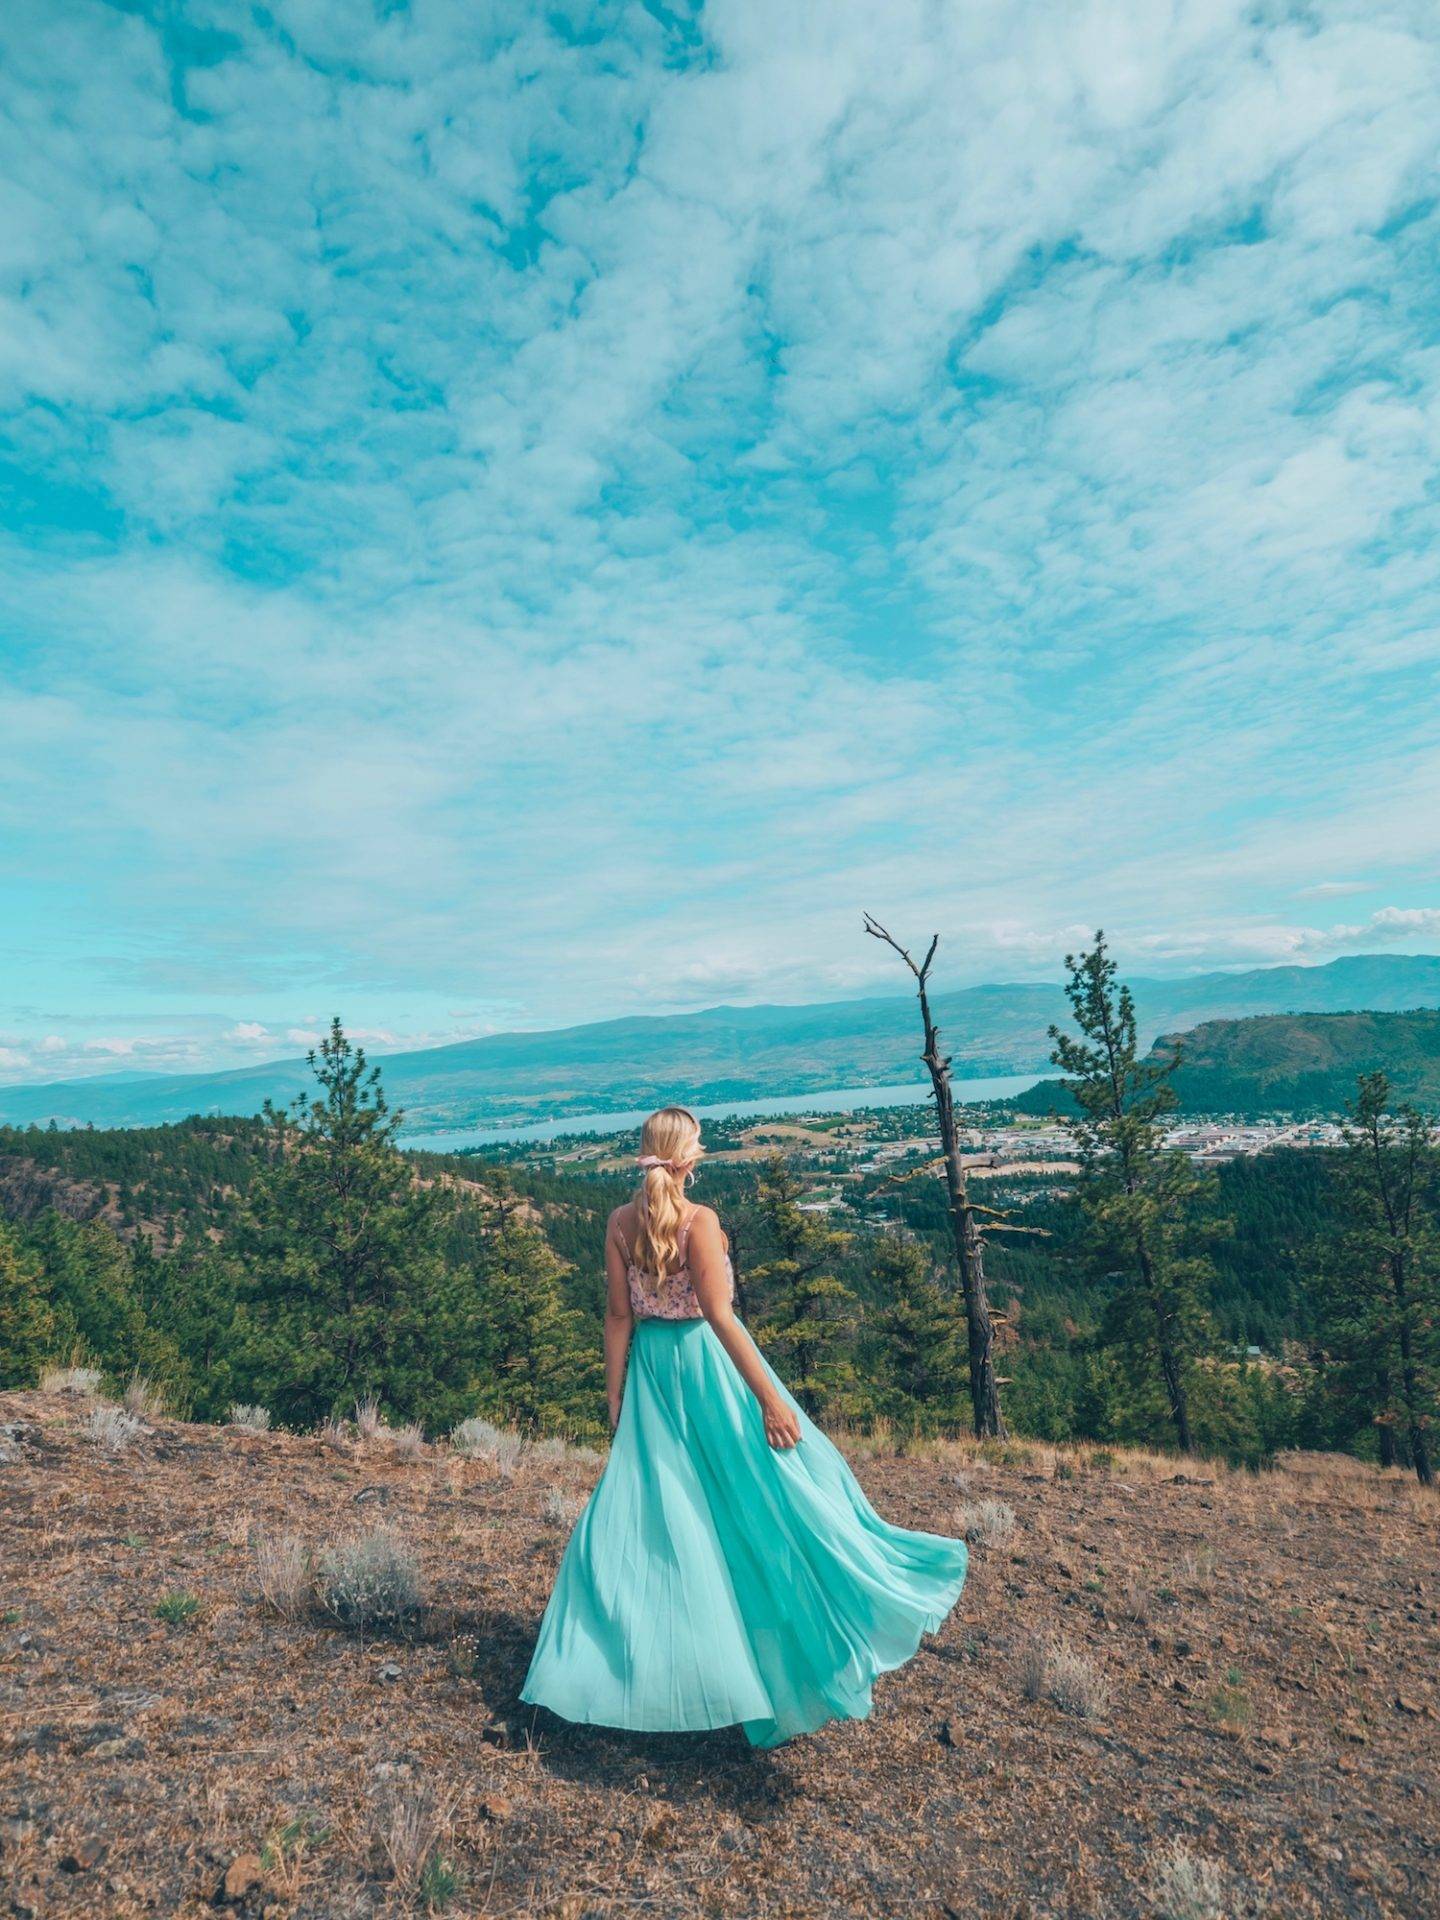 Planning a trip to Kelowna soon? This guide covers all the best things to do in Kelowna from a locals perspective! From wineries and cideries, to adventure activities, hikes, waters sports and more. This guide has everything you need to plan your visit to beautiful Kelowna! Pictured here: Hike at McDougall Rim